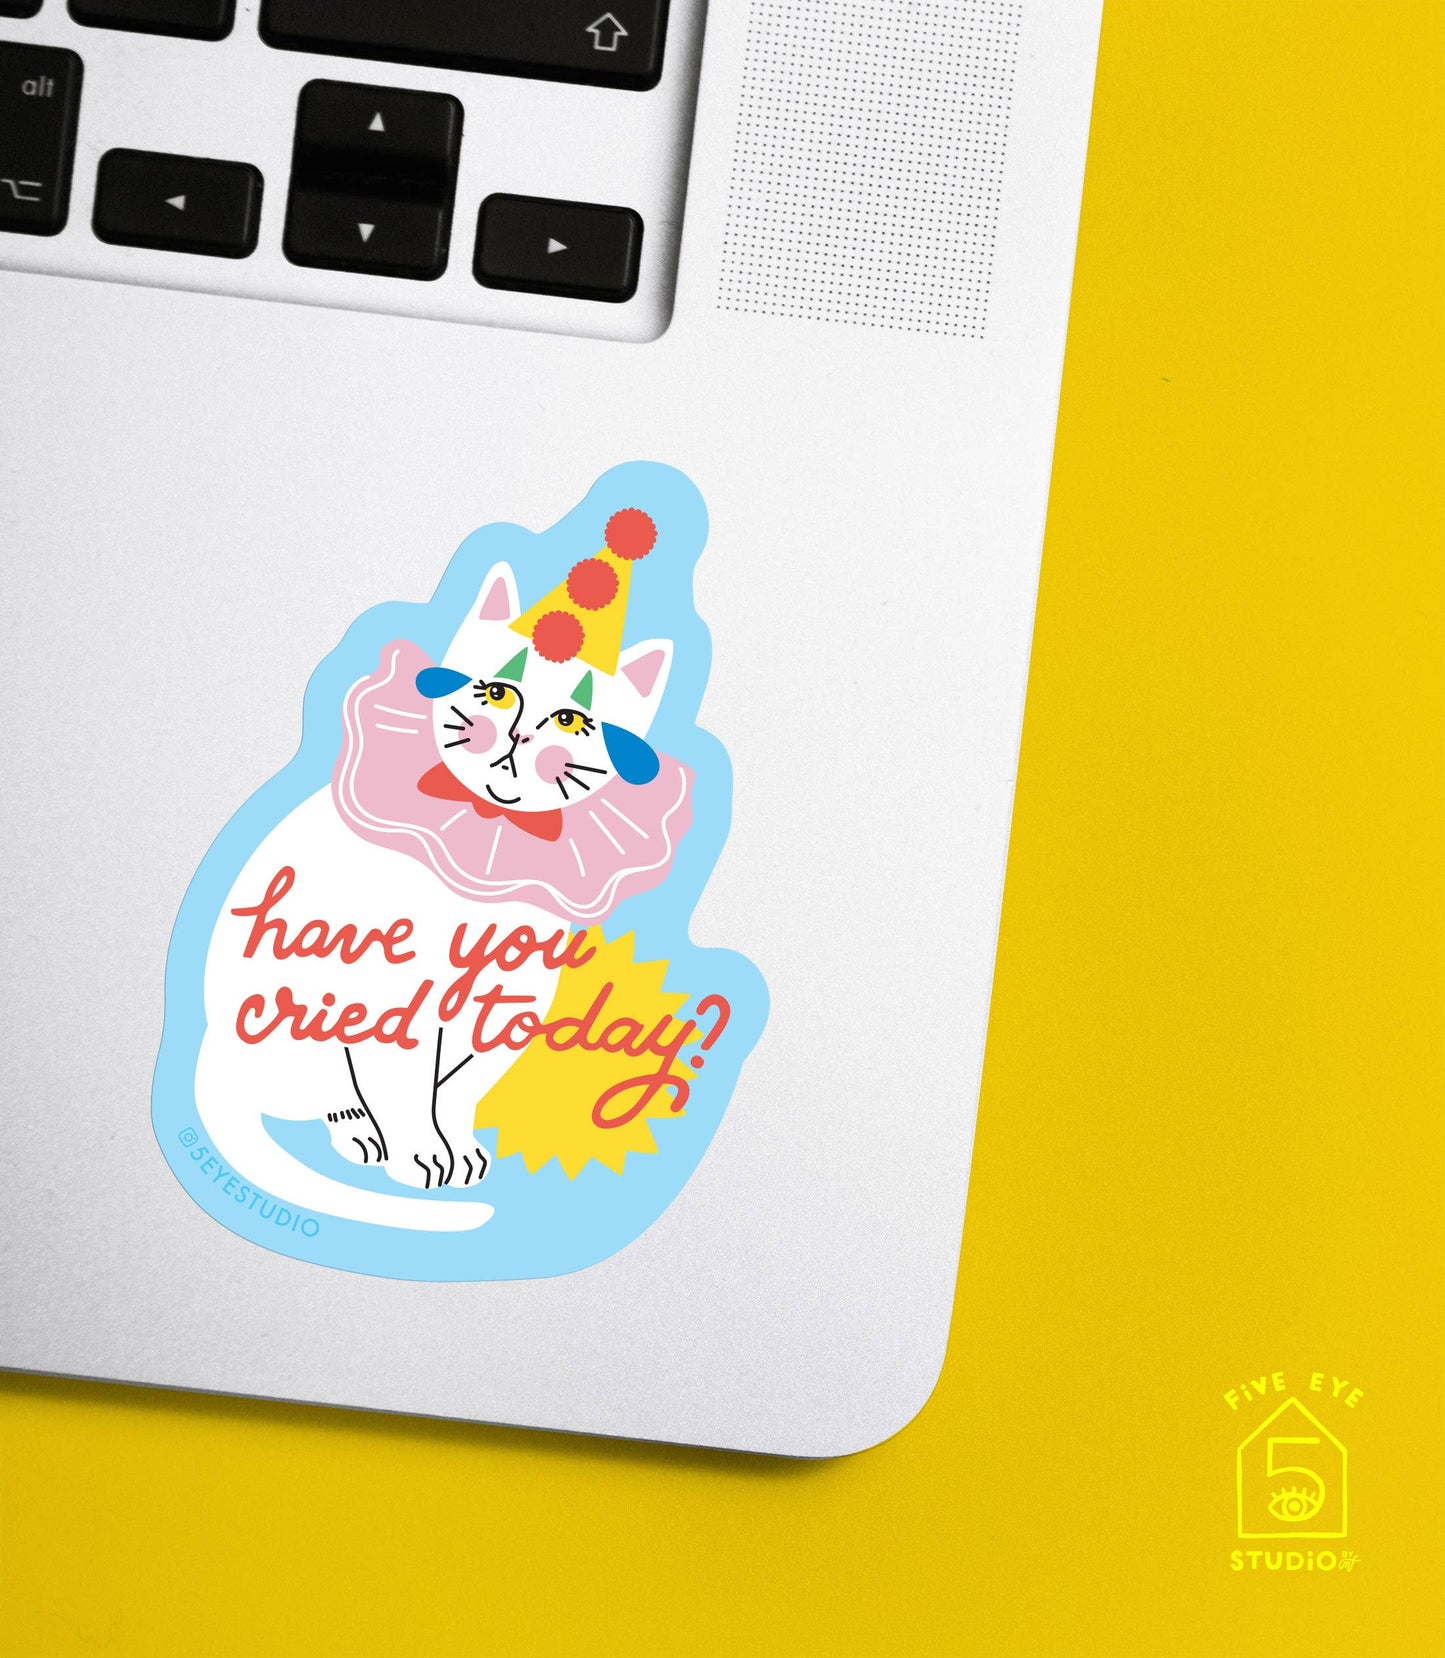 Have You Cried Today? Crying Clown Cat Vinyl Diecut Sticker